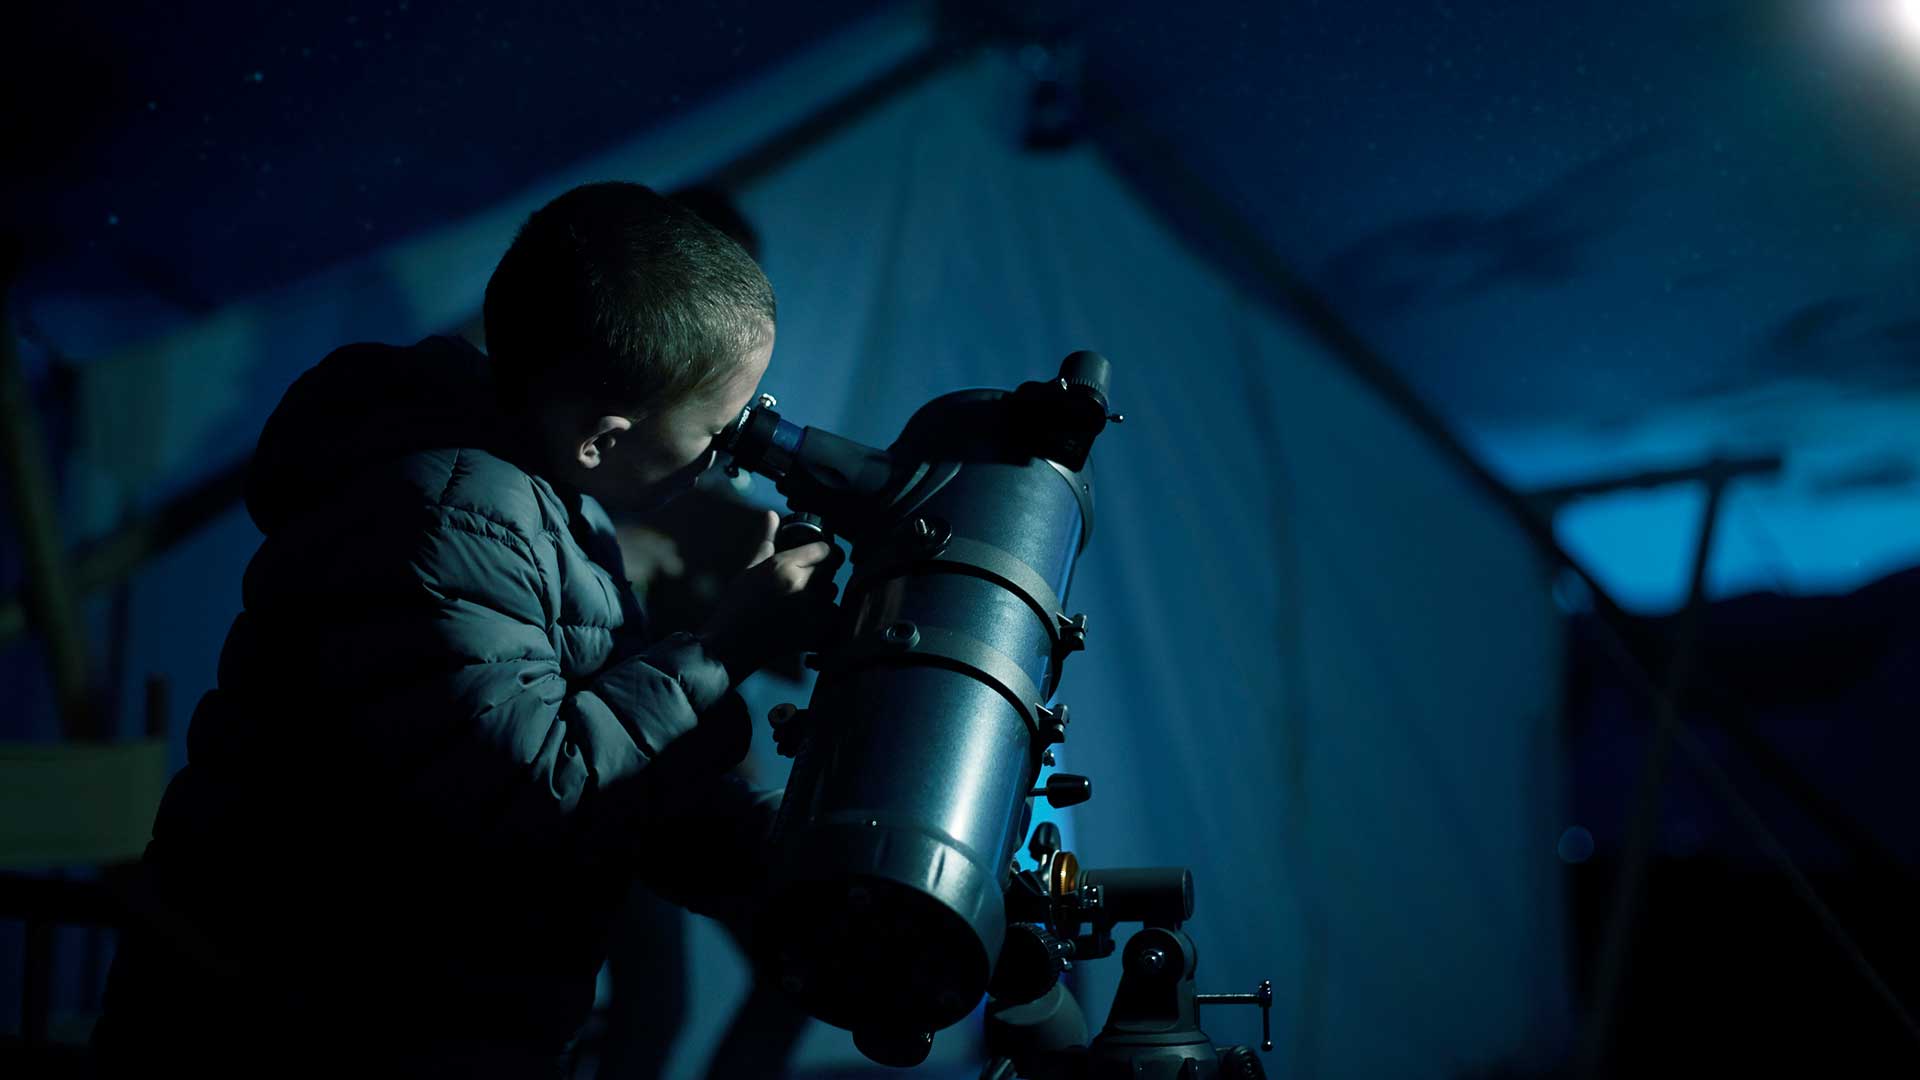 The child is using a telescope at night